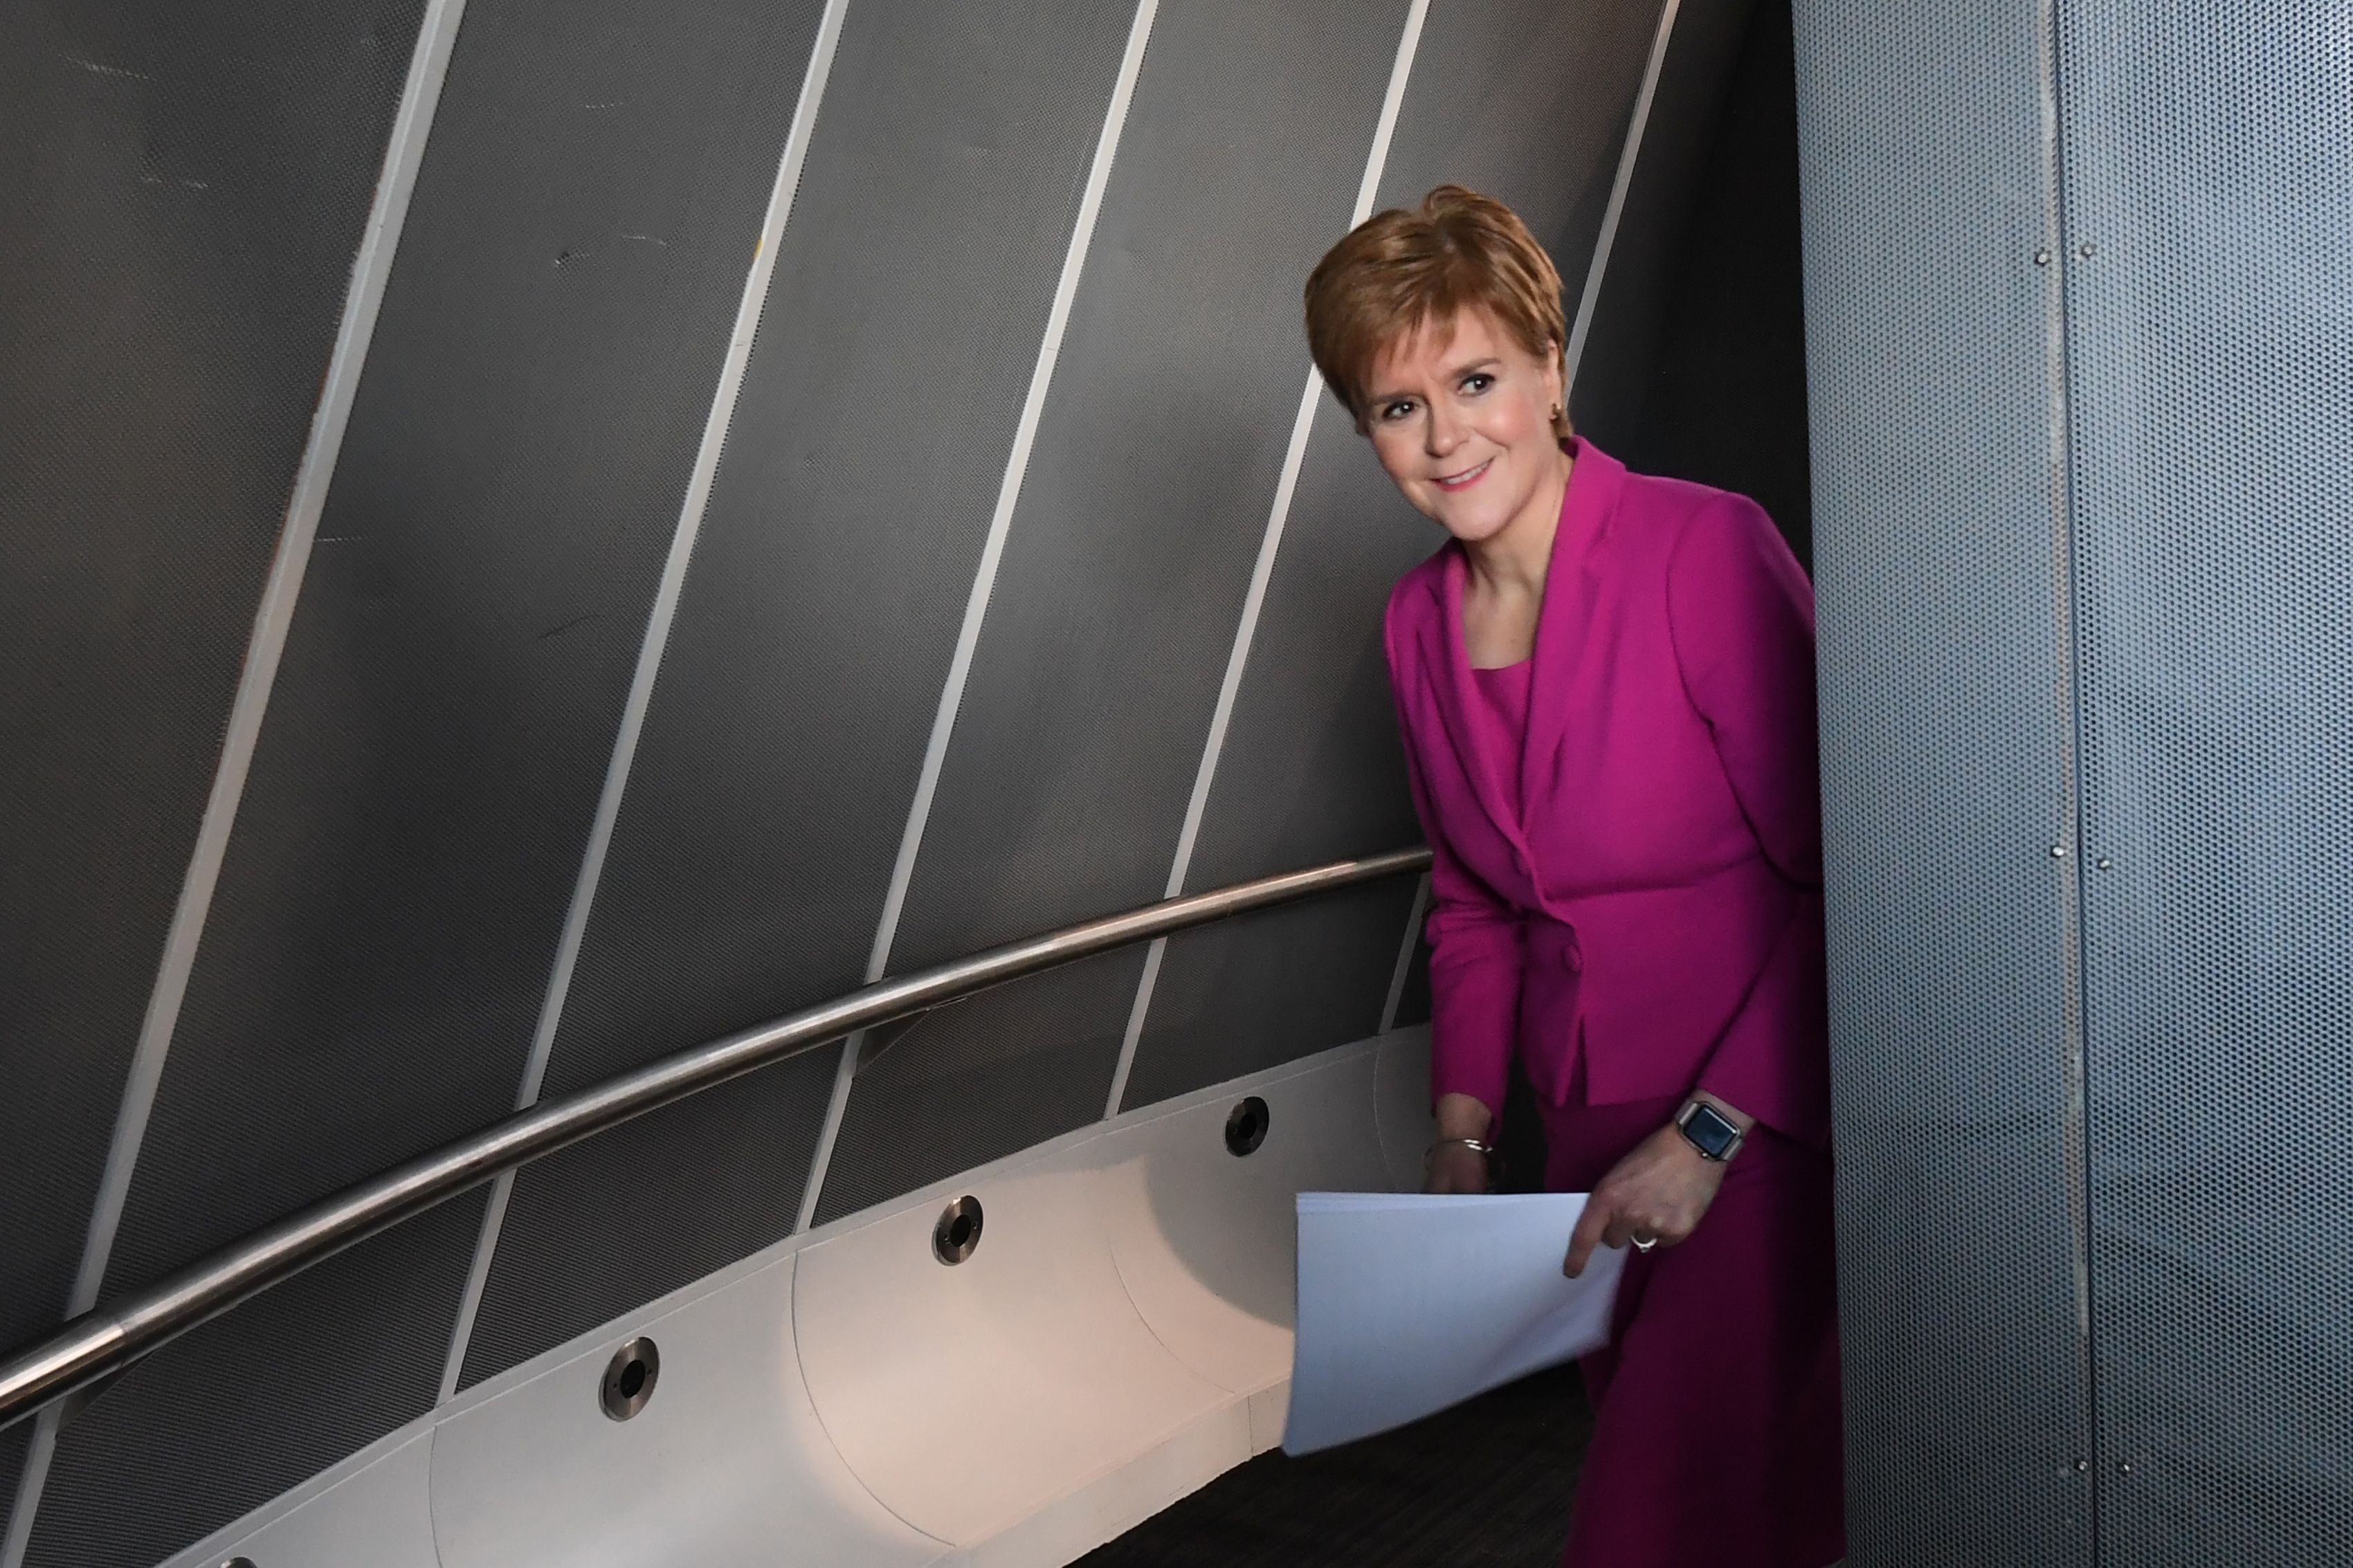 Time to shine? The SNP is expected to win May’s Scottish parliament election by a landslide, making a second independence referendum ever more likely&nbsp;